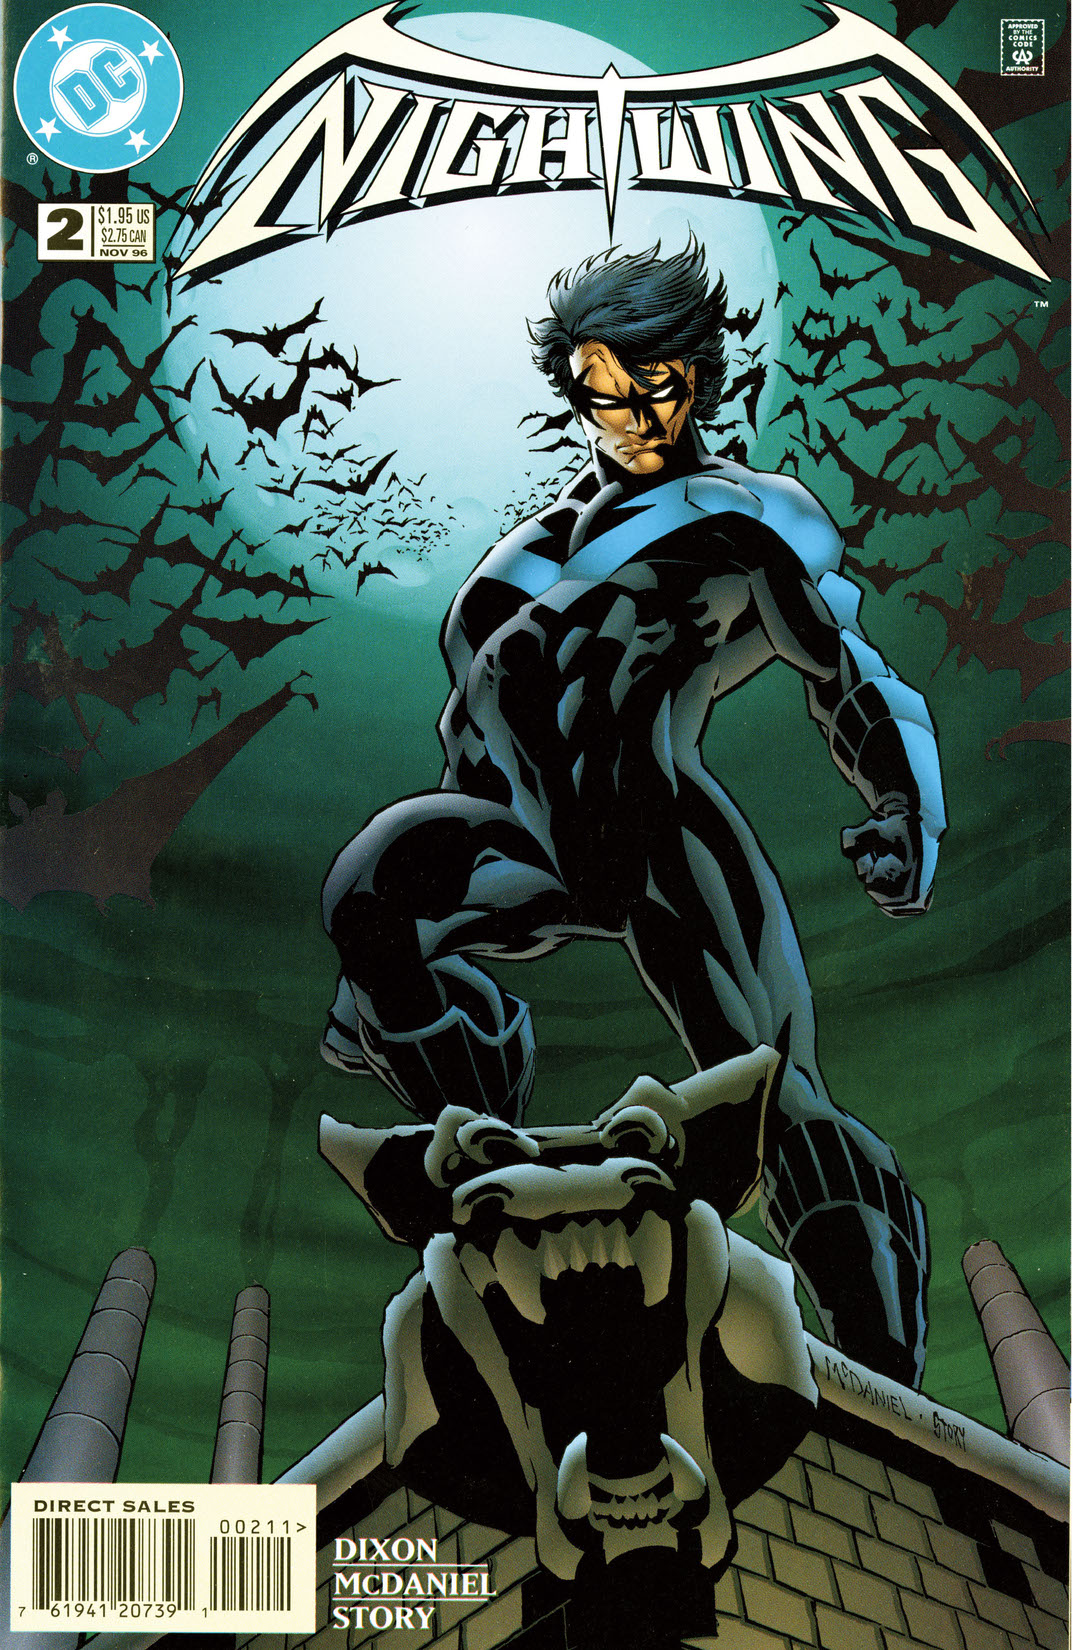 Nightwing (1996-) #2 preview images